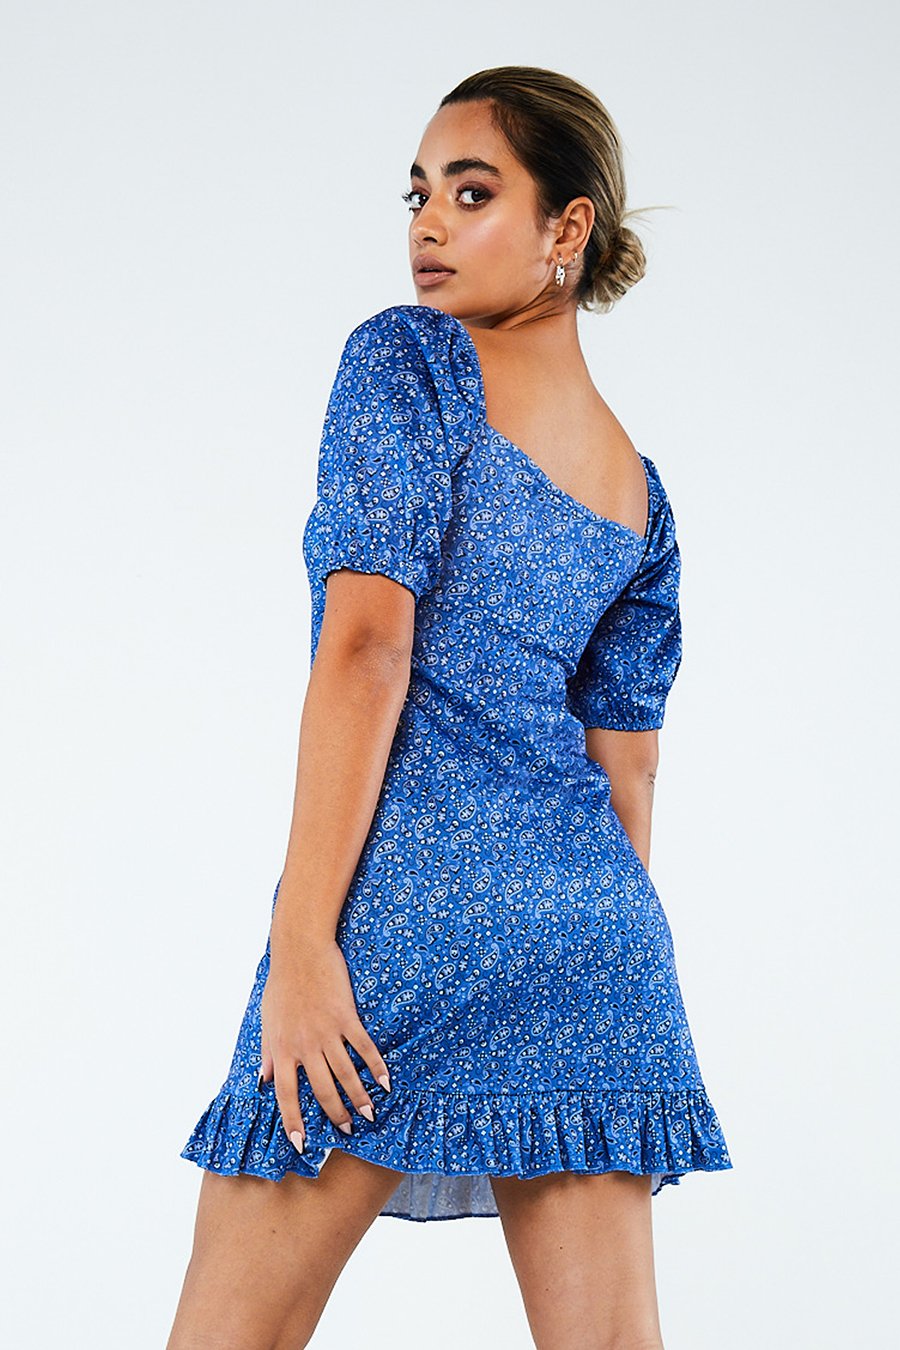 PAISLEY PUFF DRESS - EXCLUSIVE Dresses from NGO - Just $20.00! SHOP NOW AT IAMINHATELOVE BOTH IN STORE FOR CYPRUS AND ONLINE WORLDWIDE